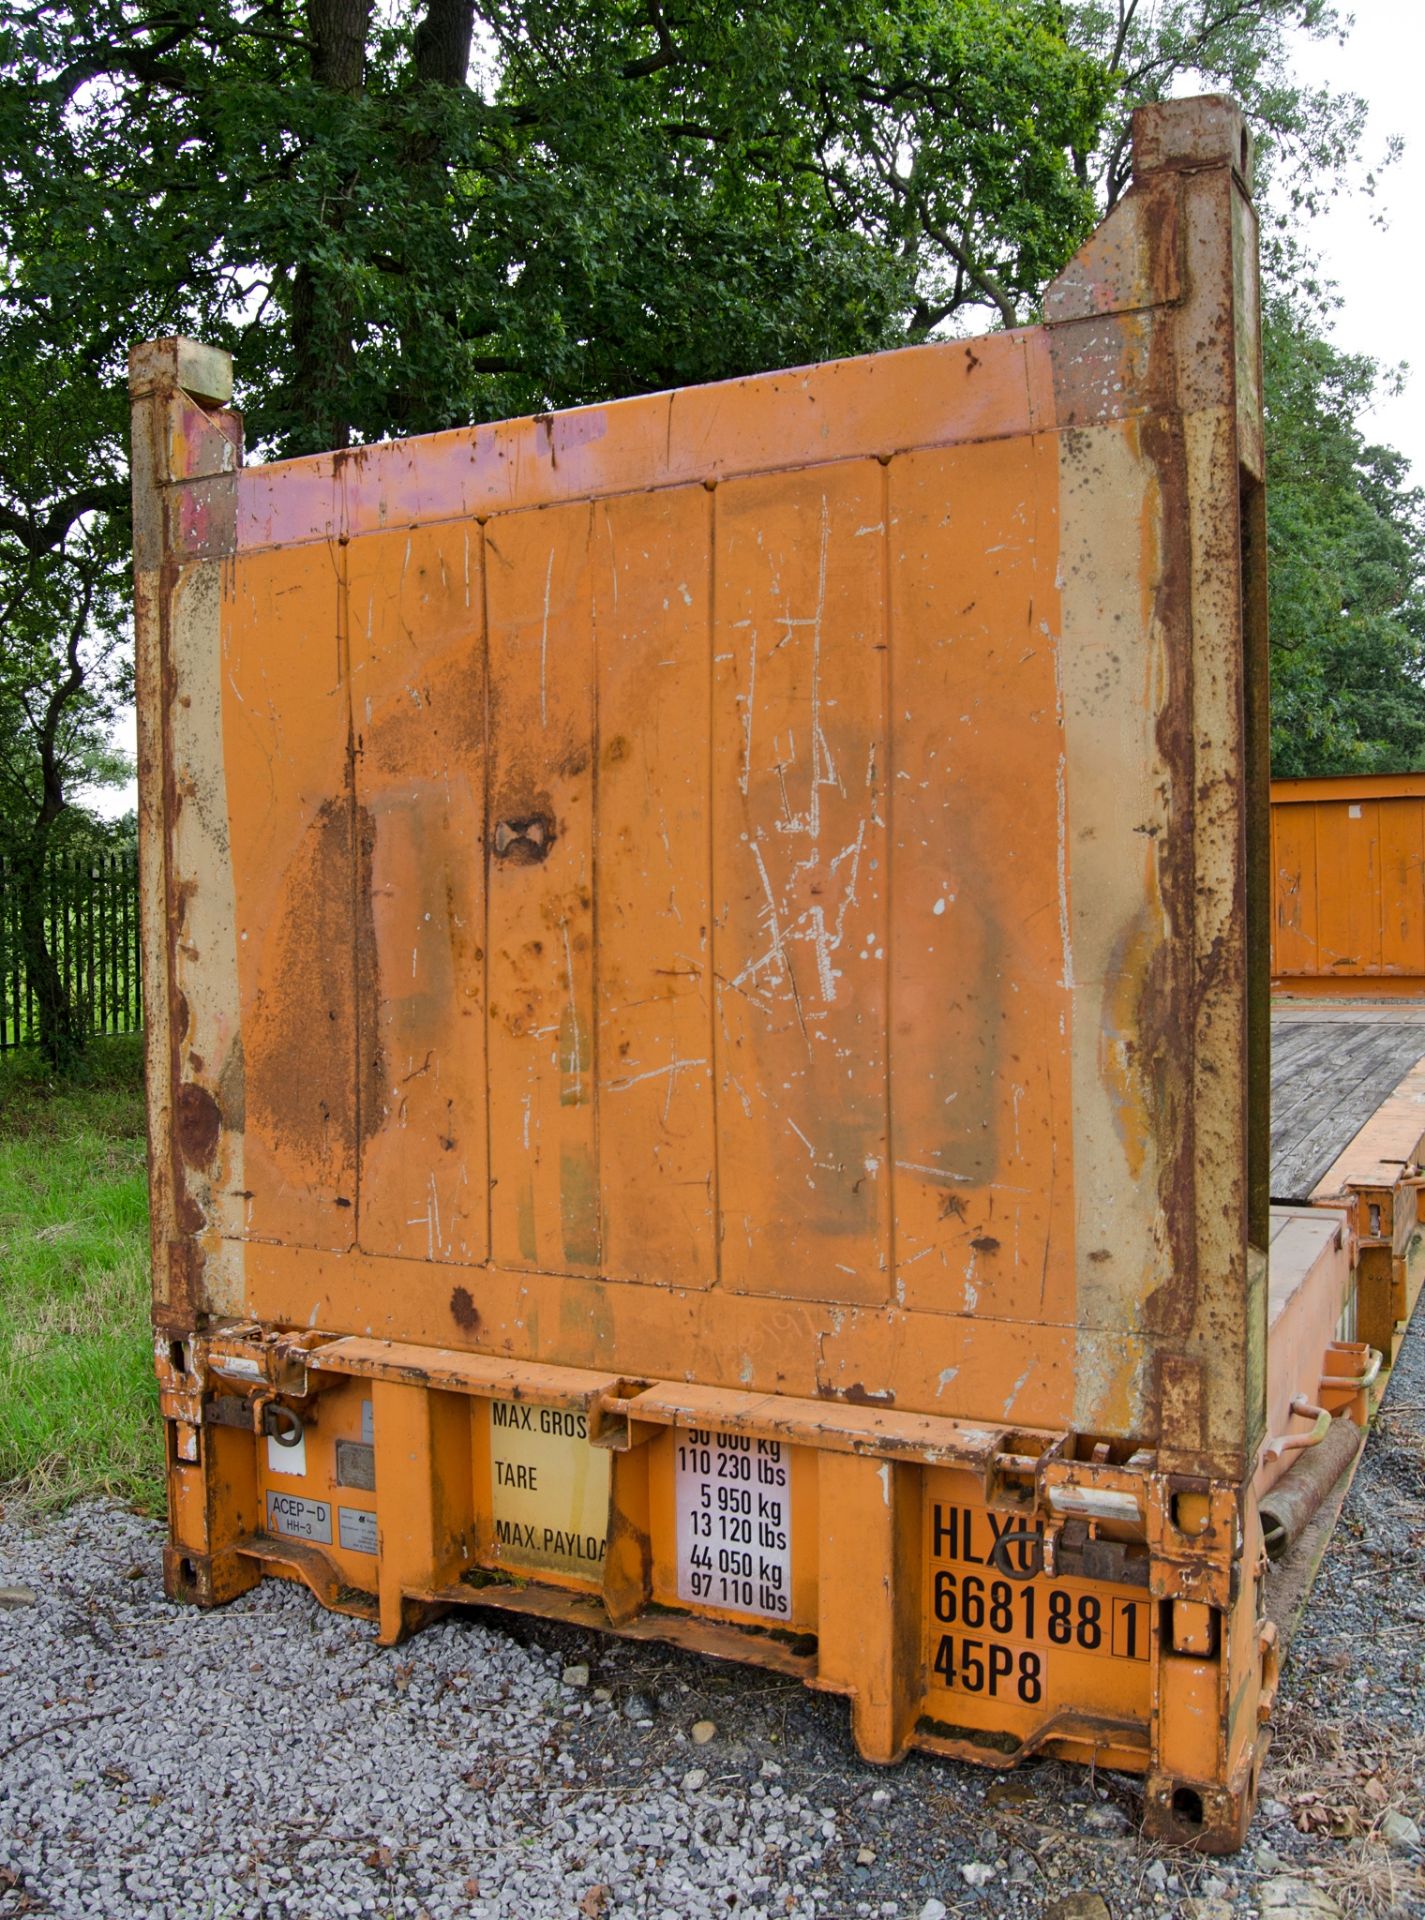 50 tonne flat rack container - Image 5 of 9